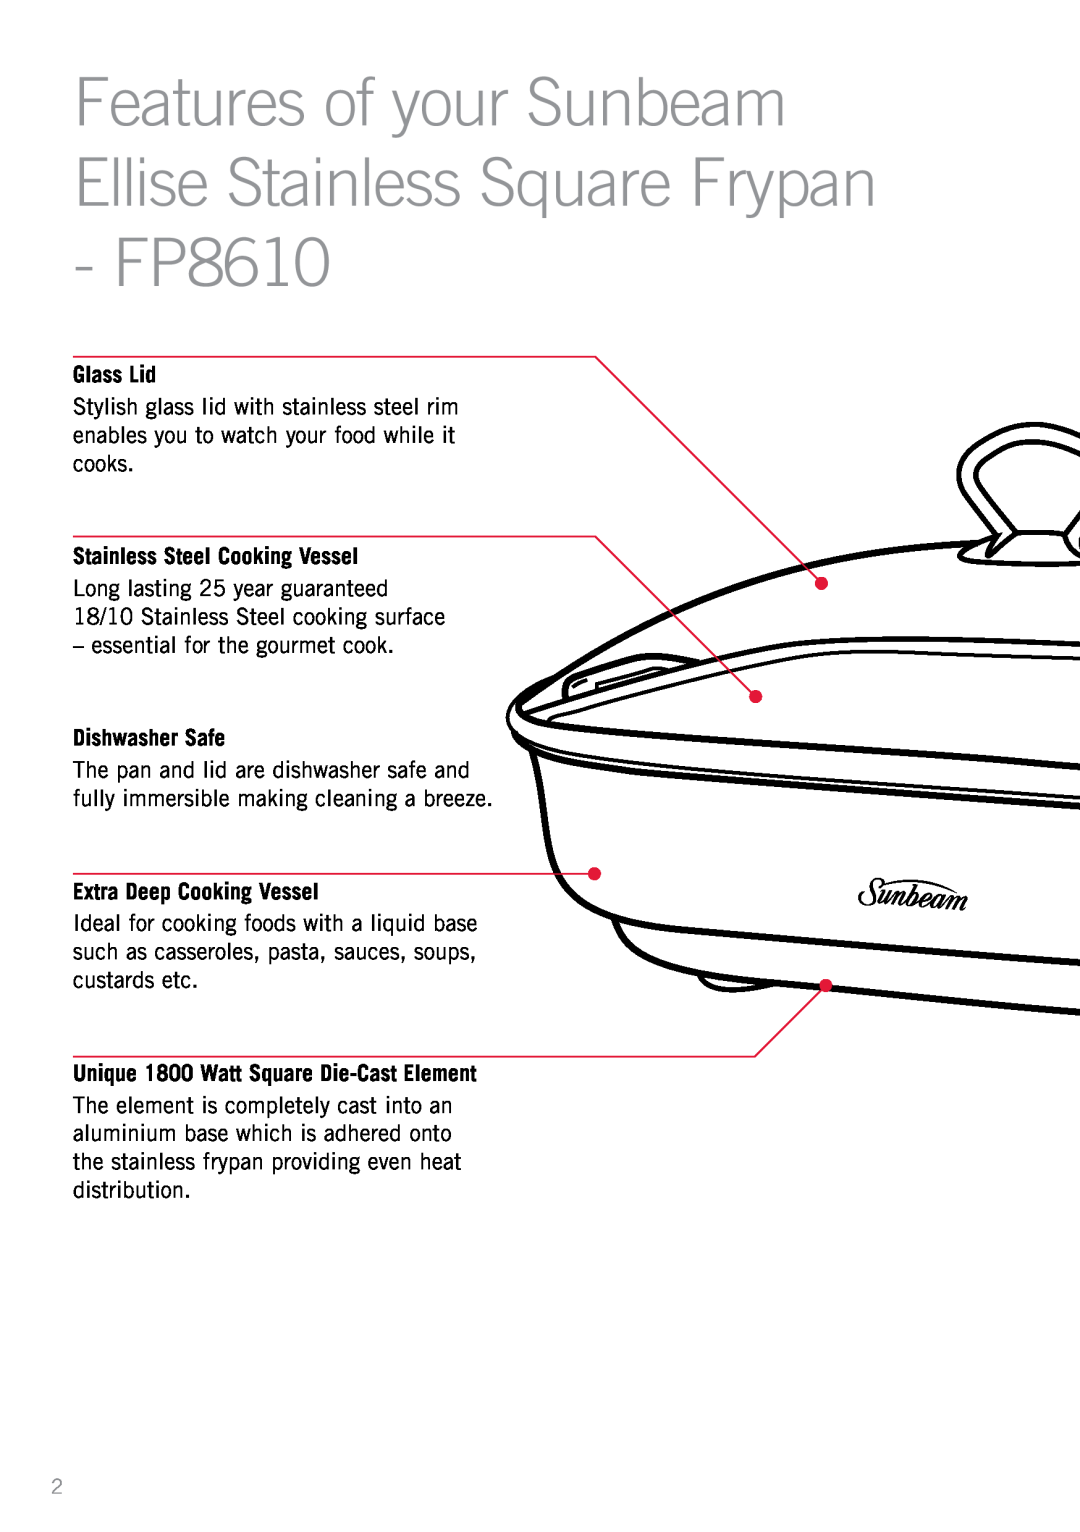 Sunbeam FP8610, FP8910 manual Glass Lid, Stainless Steel Cooking Vessel, Dishwasher Safe, Extra Deep Cooking Vessel 